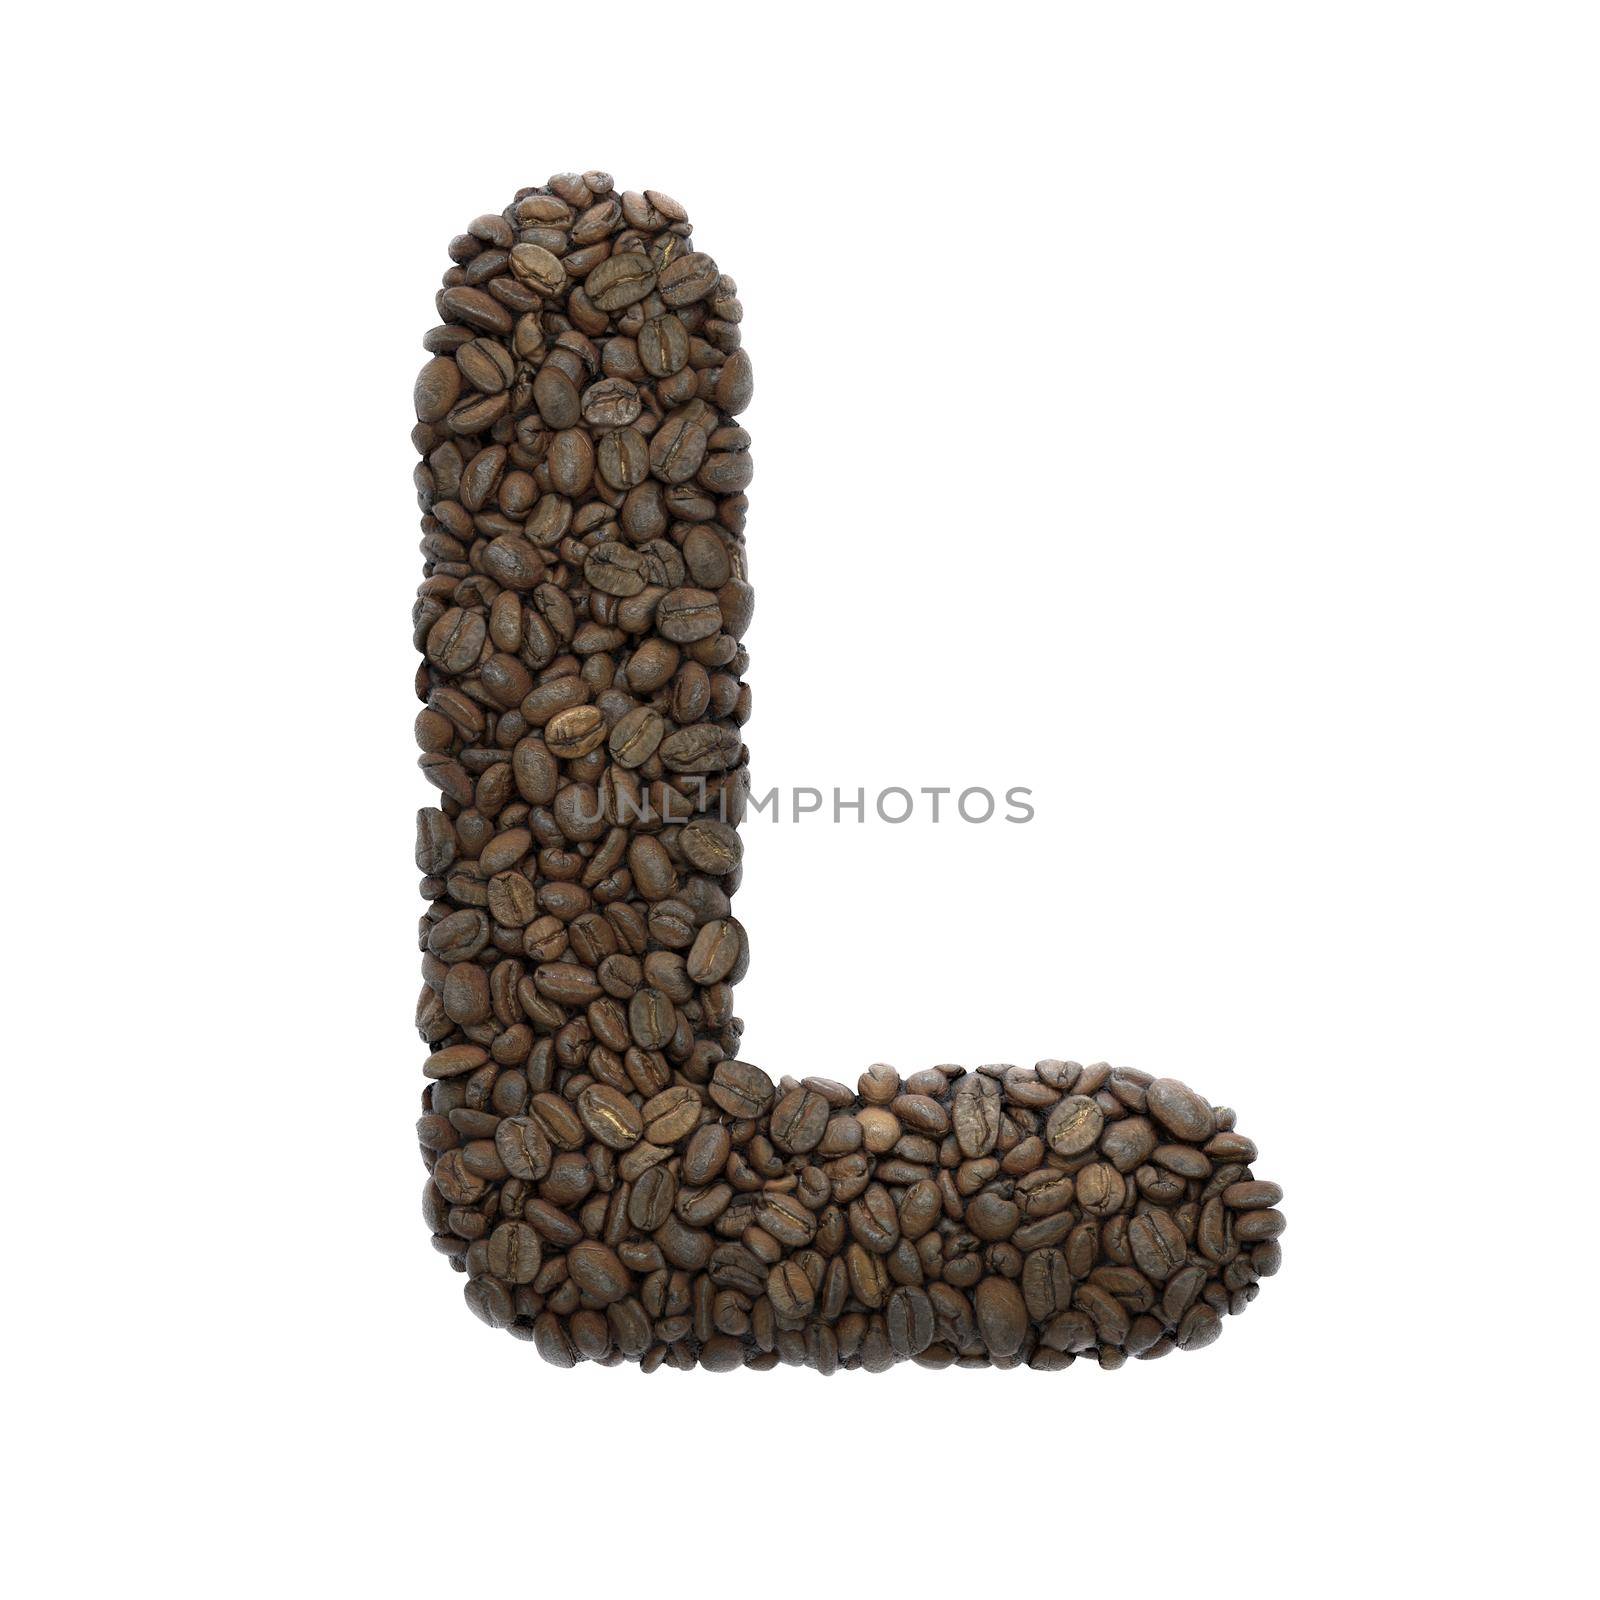 Coffee letter L - Capital 3d roasted beans font - suitable for Coffee, energy or insomnia related subjects by chrisroll